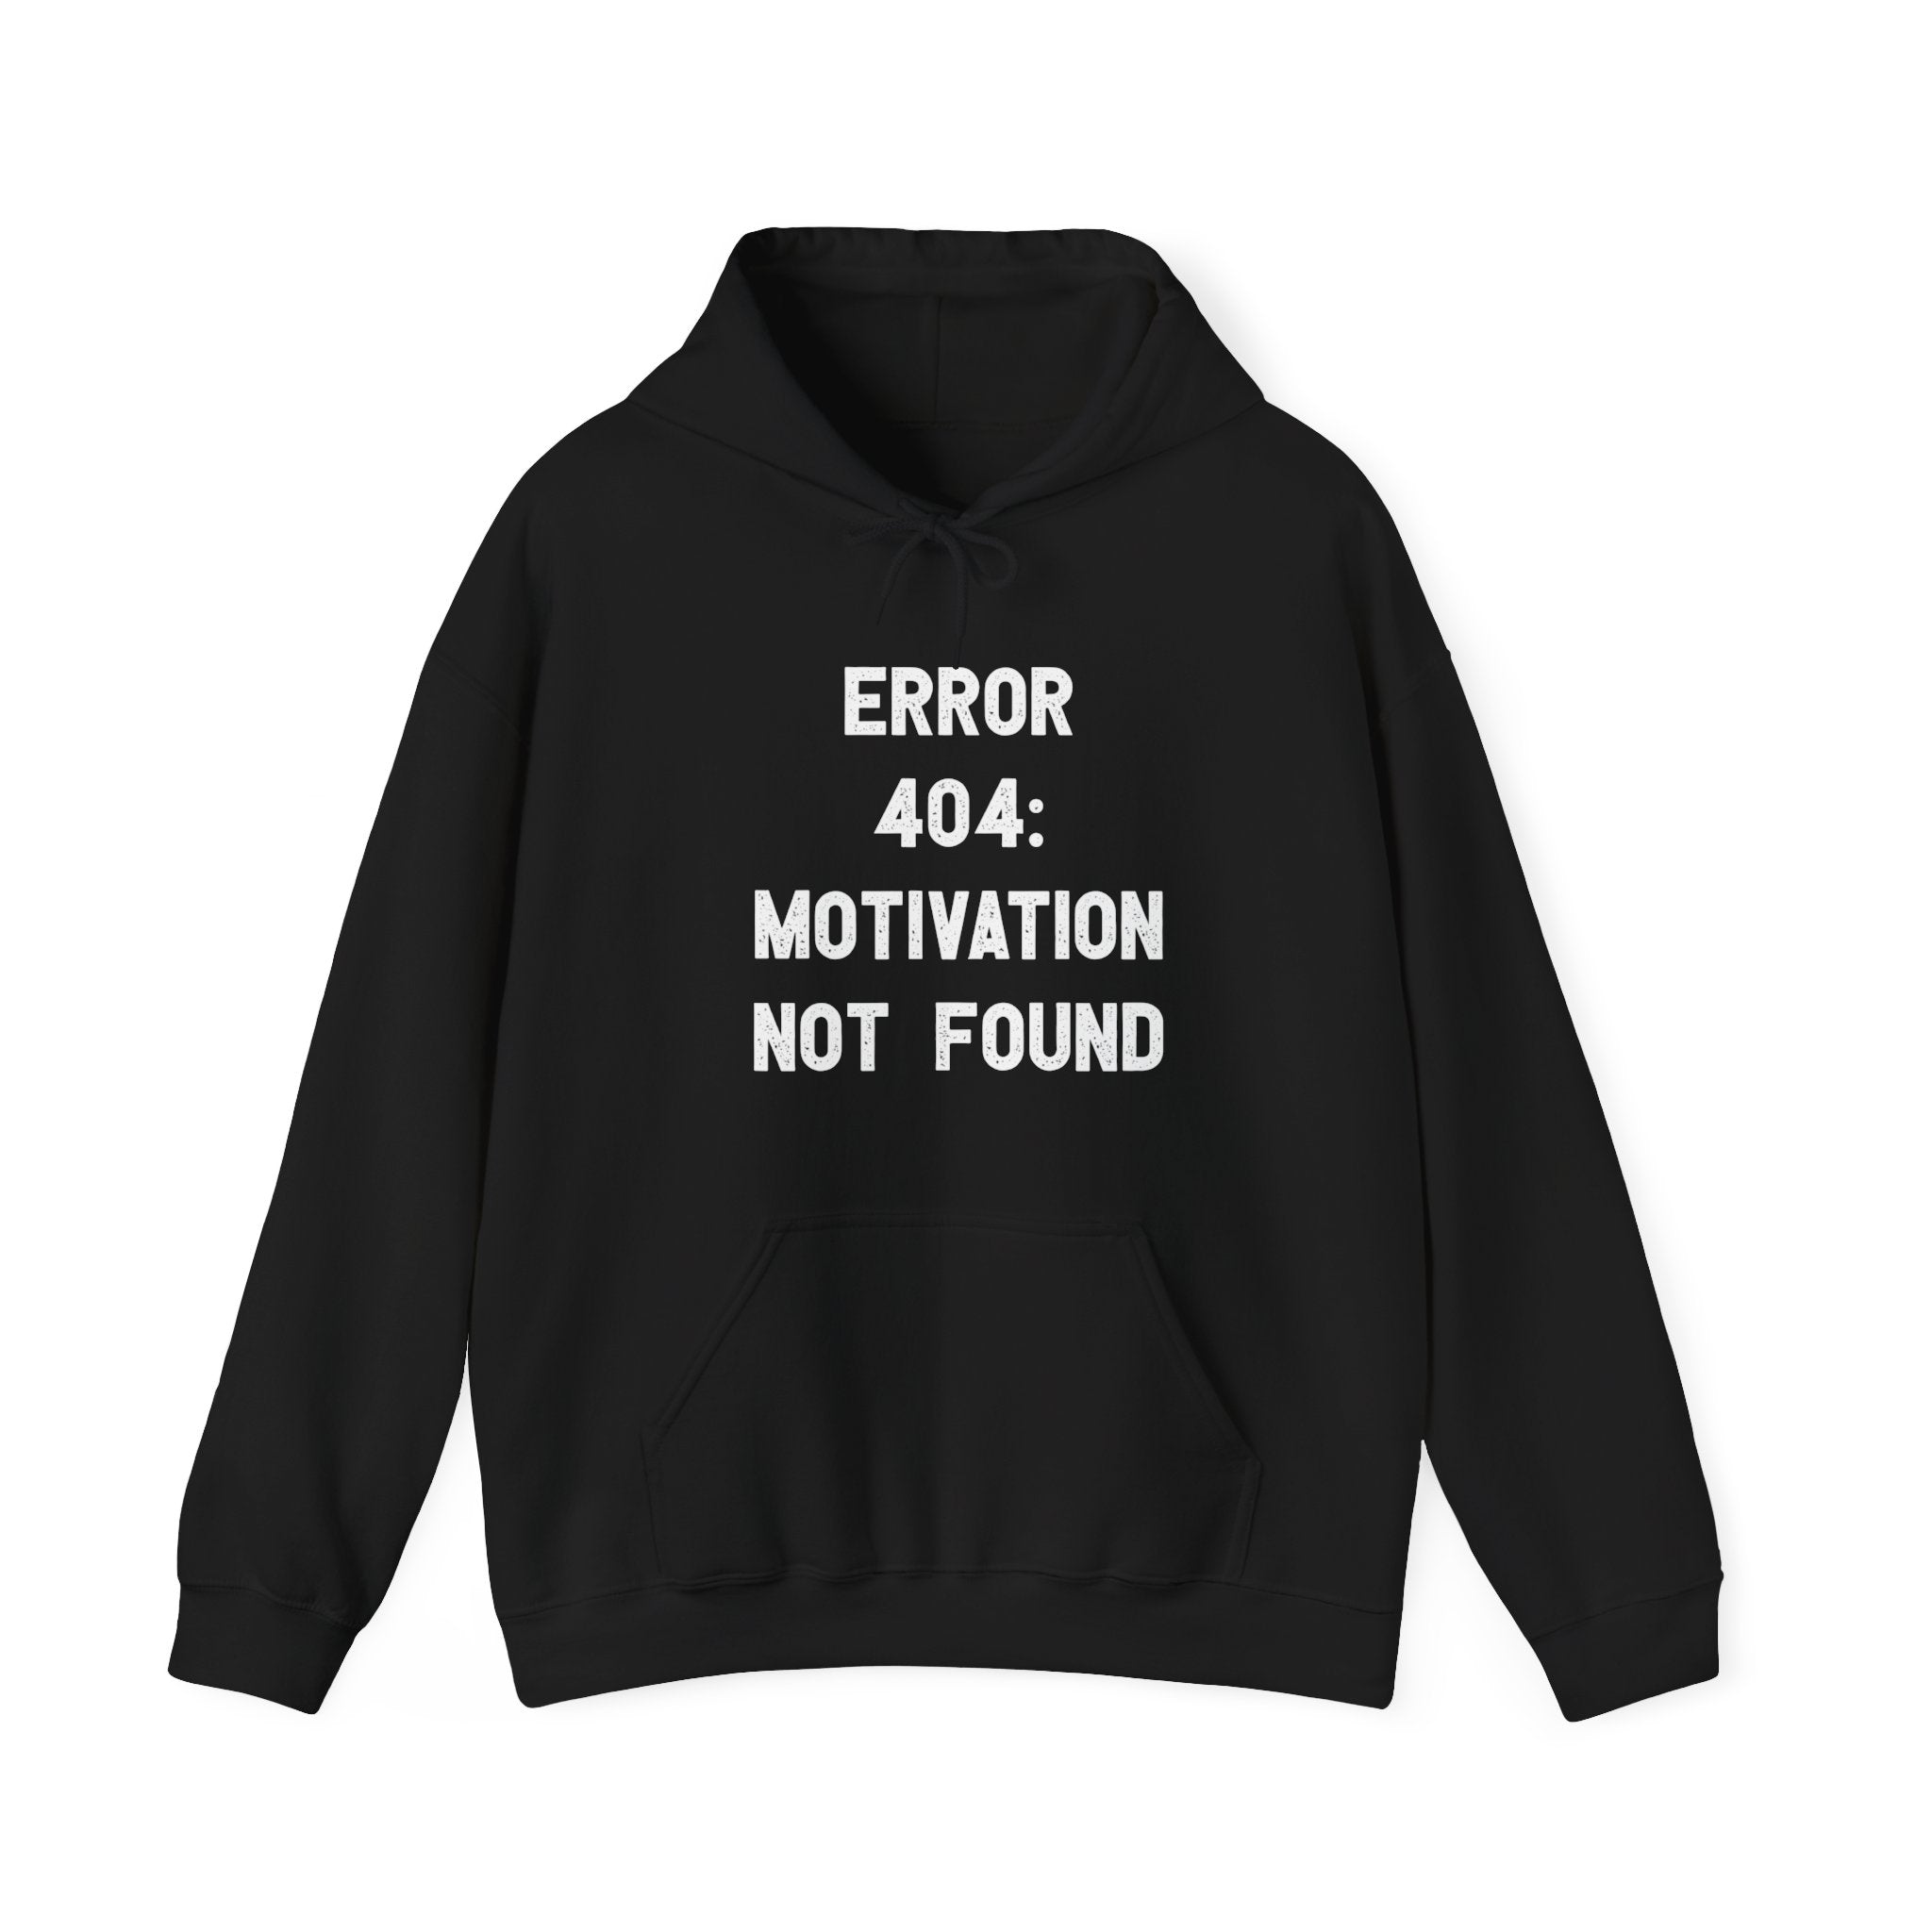 This Error 404: Motivation not found - Hooded Sweatshirt features the witty phrase "Error 404: Motivation Not Found" printed in bold white text on the front, perfect for a casual look.